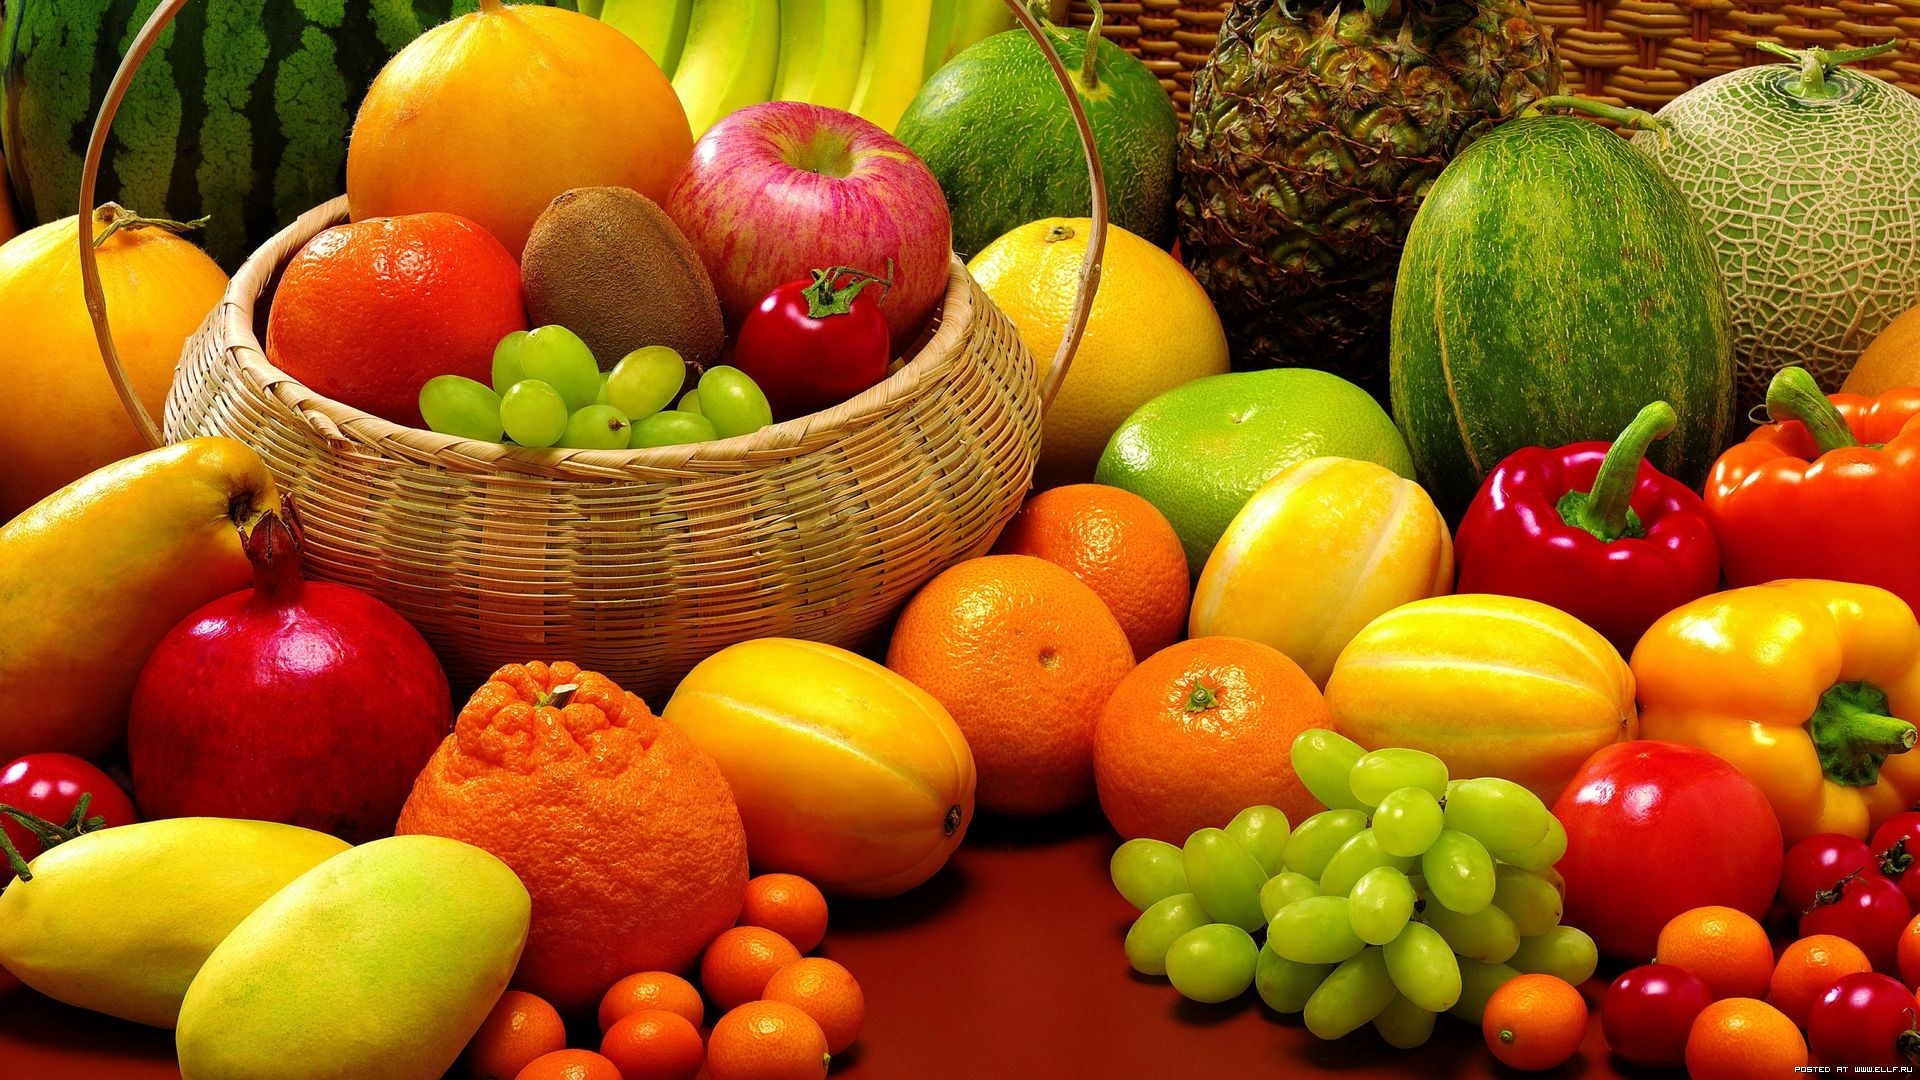 Download Fruits wallpaper for mobile phone, free Fruits HD picture